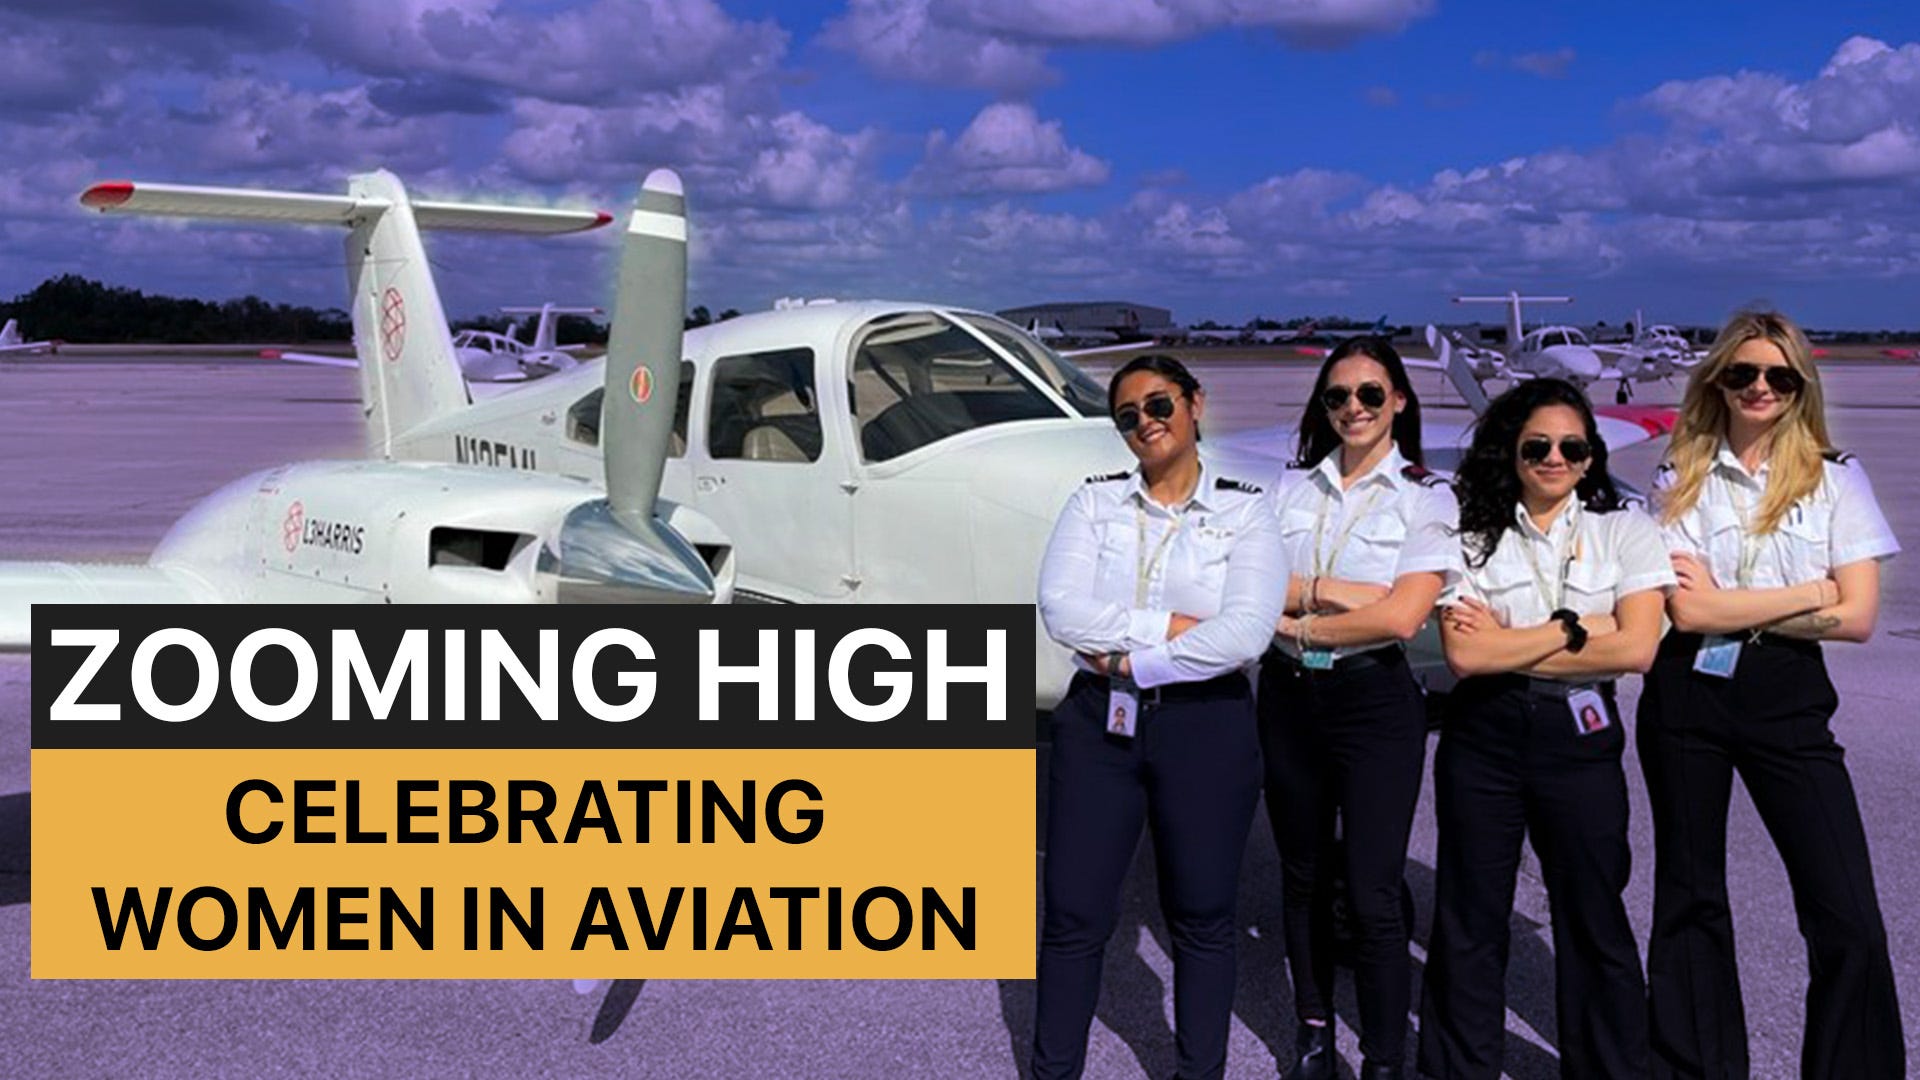 Zooming High: Celebrating Women in Aviation